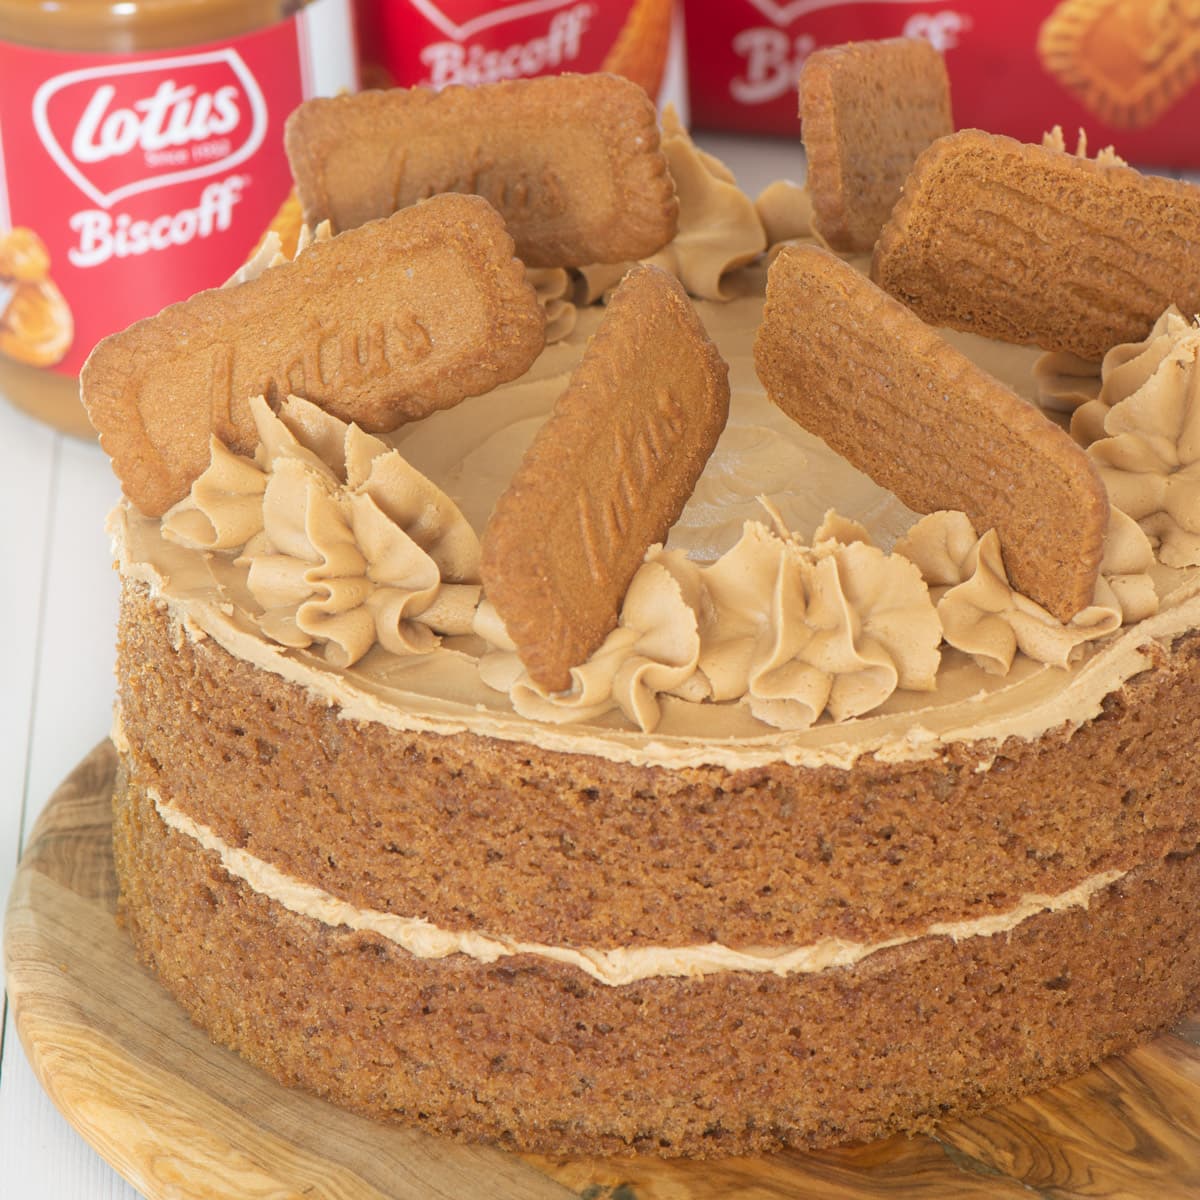 Biscoff cake on a wooden board.